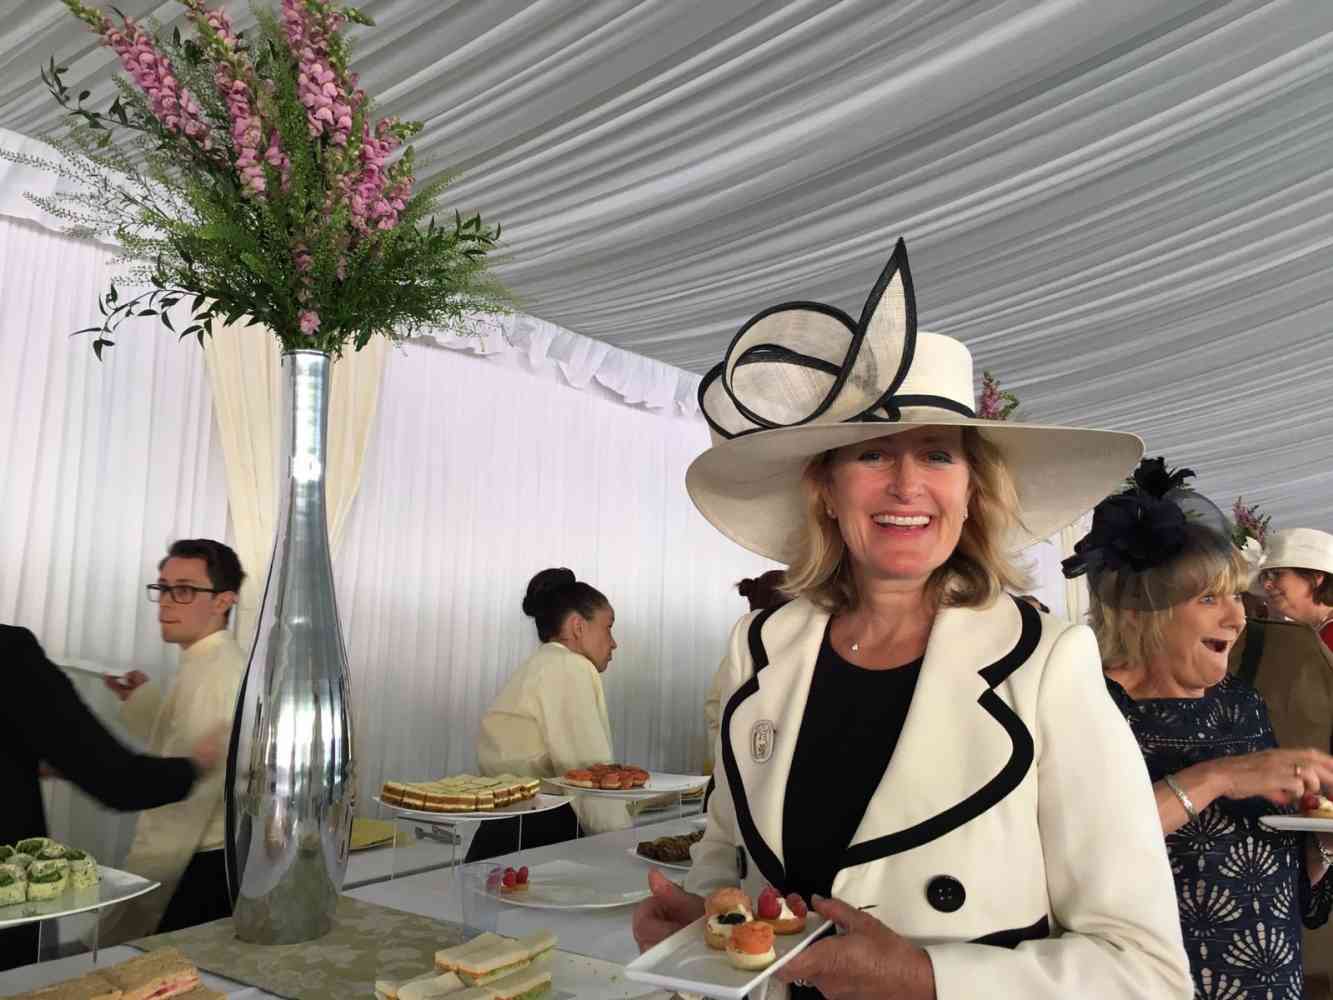 Representing the Royal College of Occupational Therapists at the Queen's Garden Party